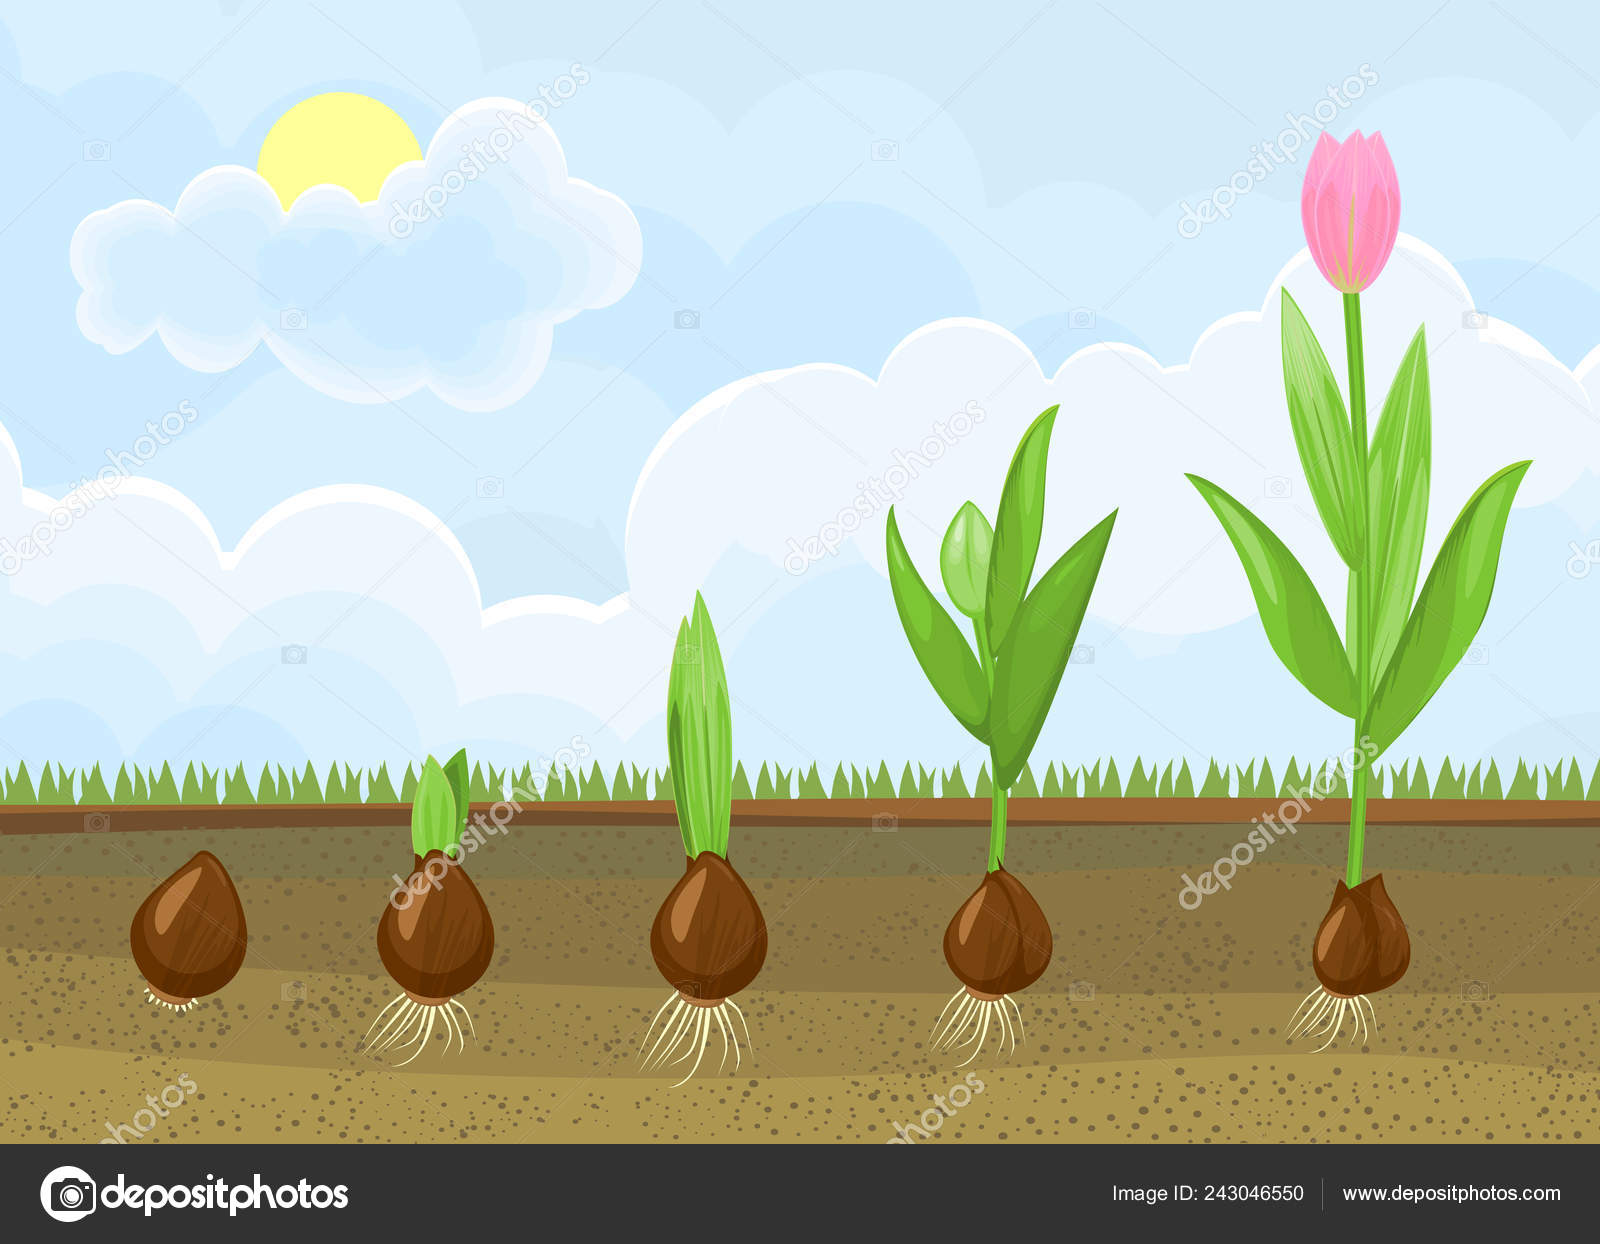 Tulip Growth Stages  